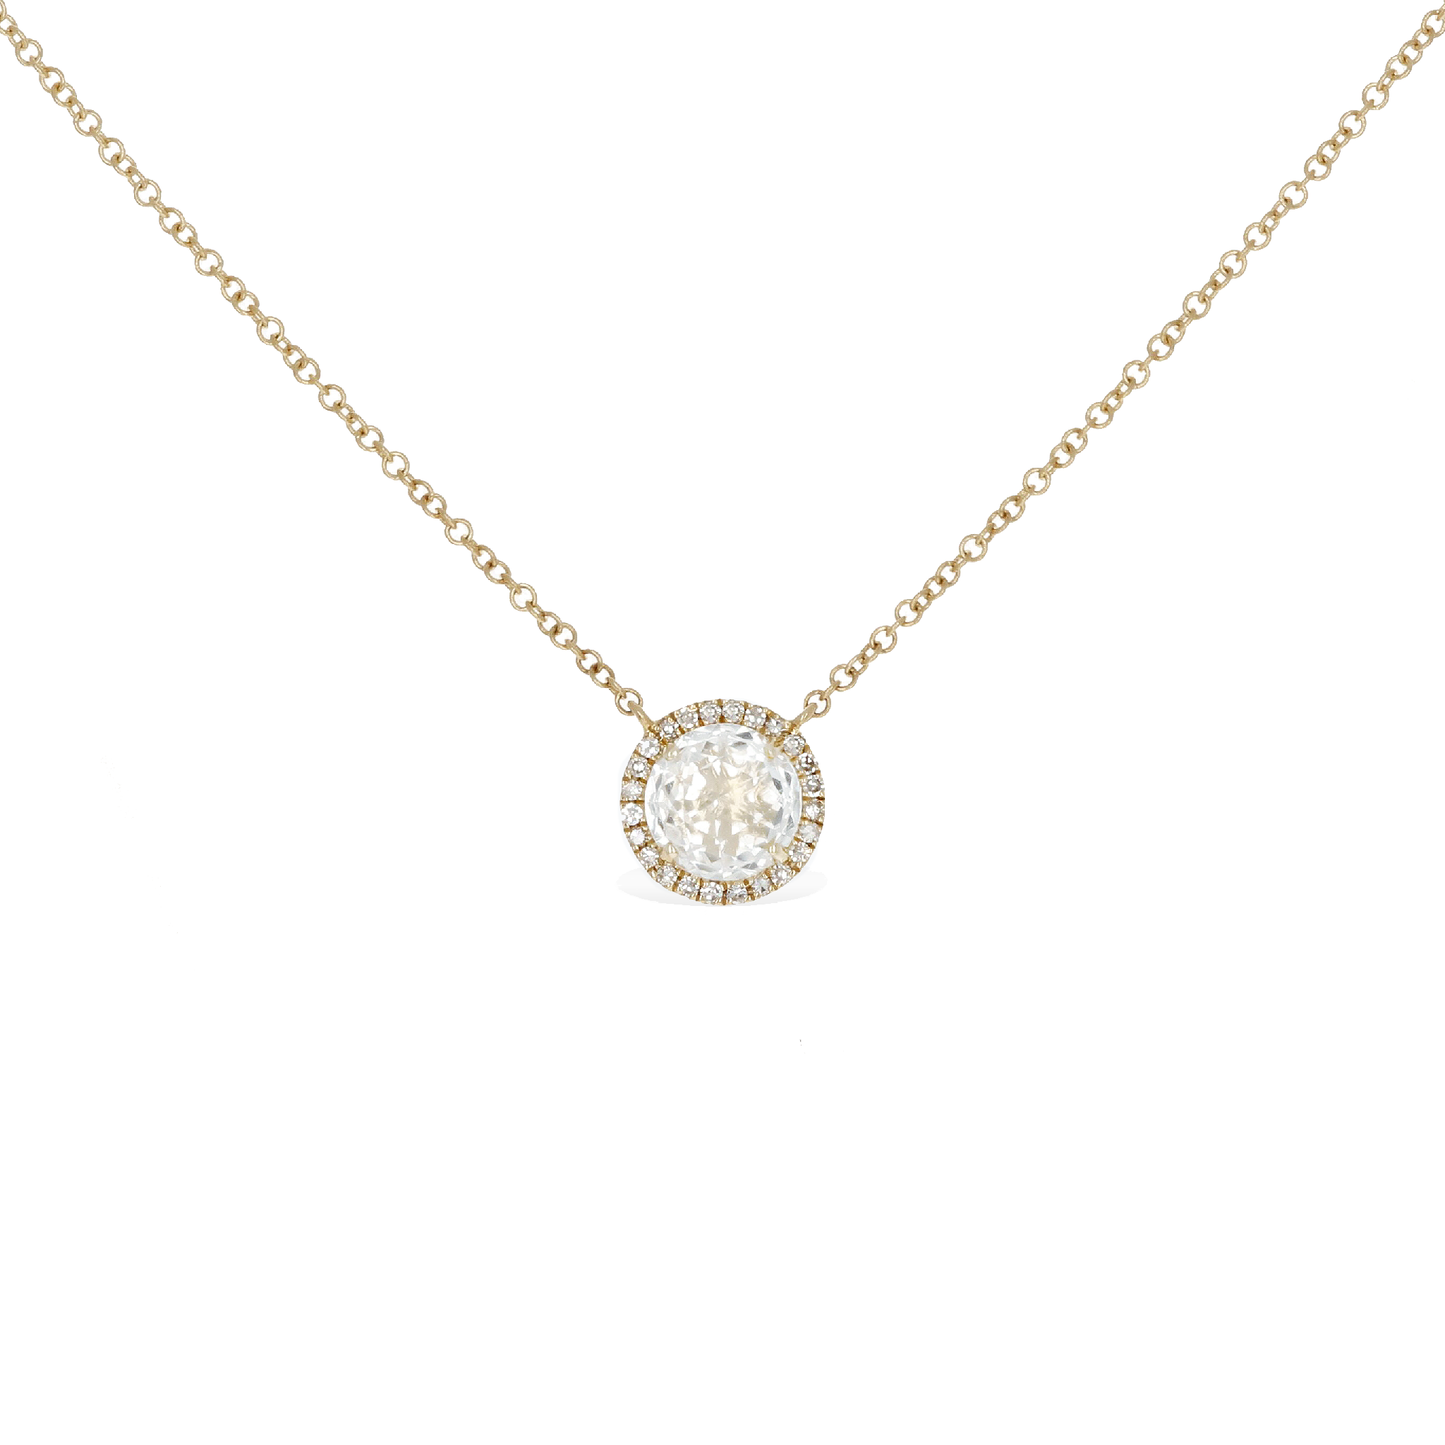 White Topaz Solitaire Necklace from Alexandra Marks Jewelry